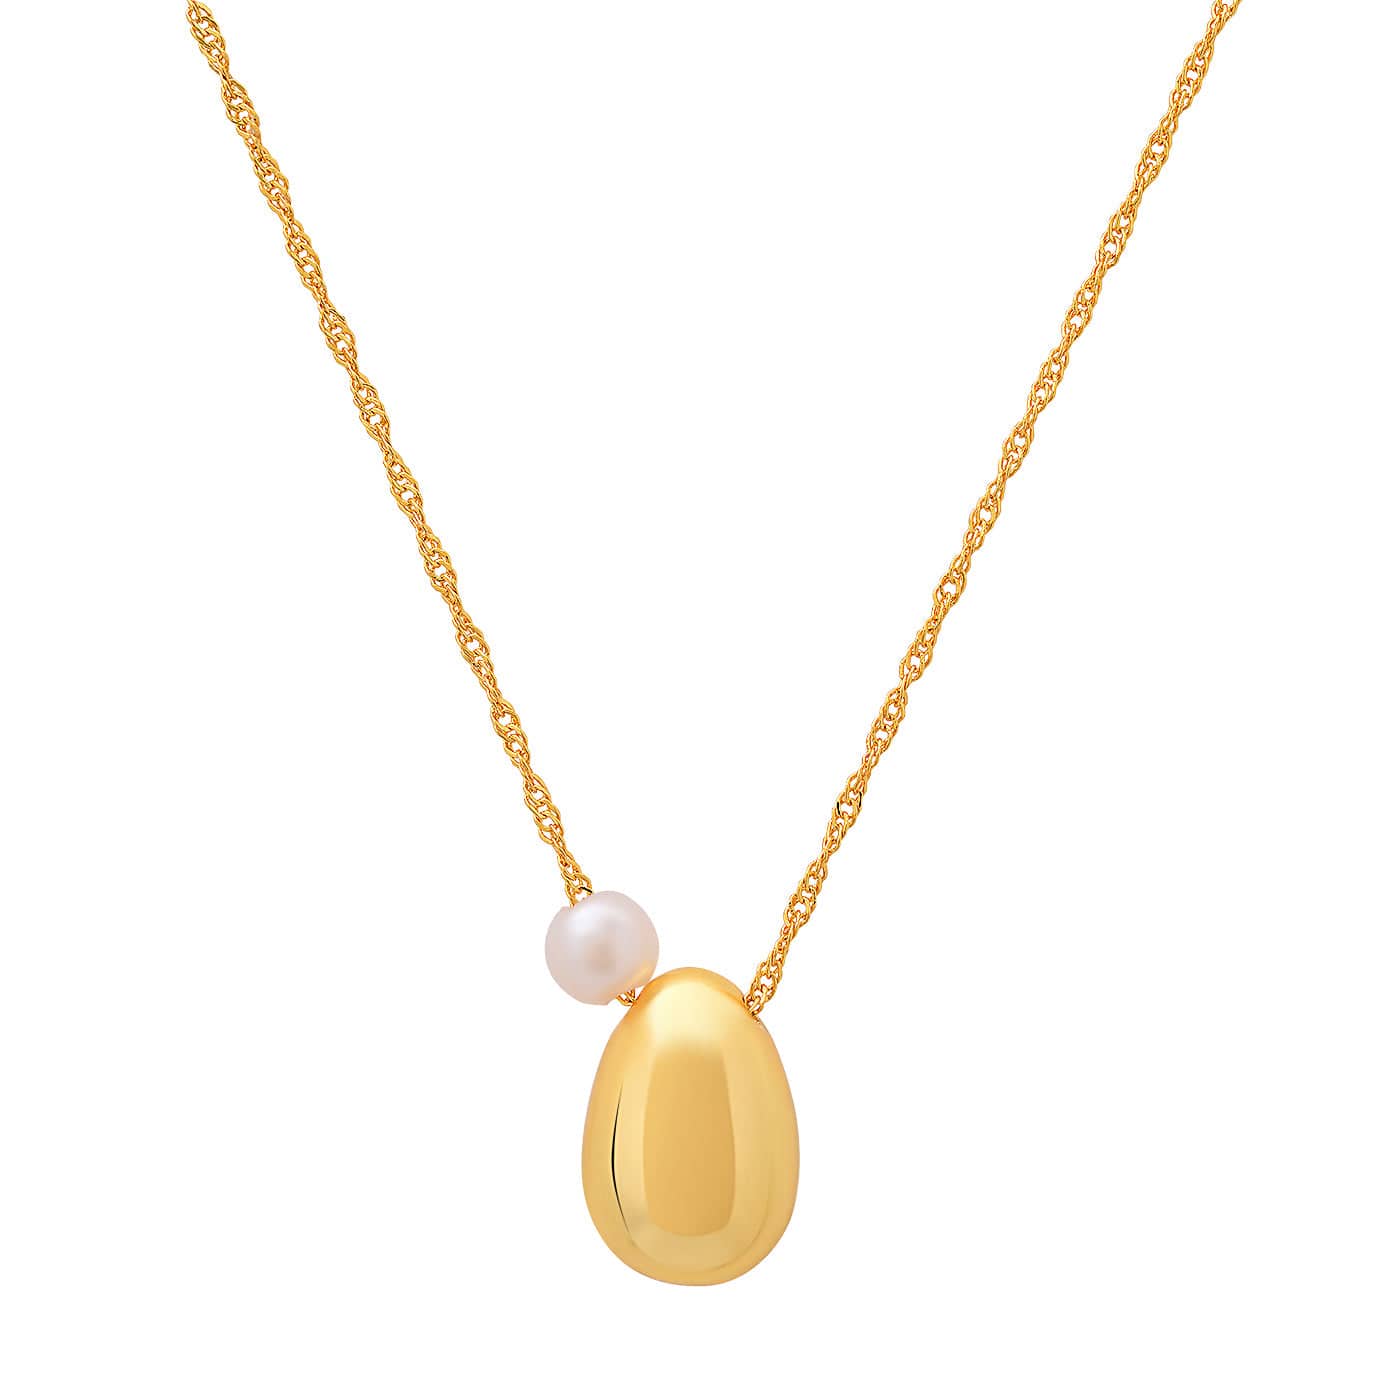 TAI JEWELRY Necklace Gold Bean Necklace with Pearl Accent